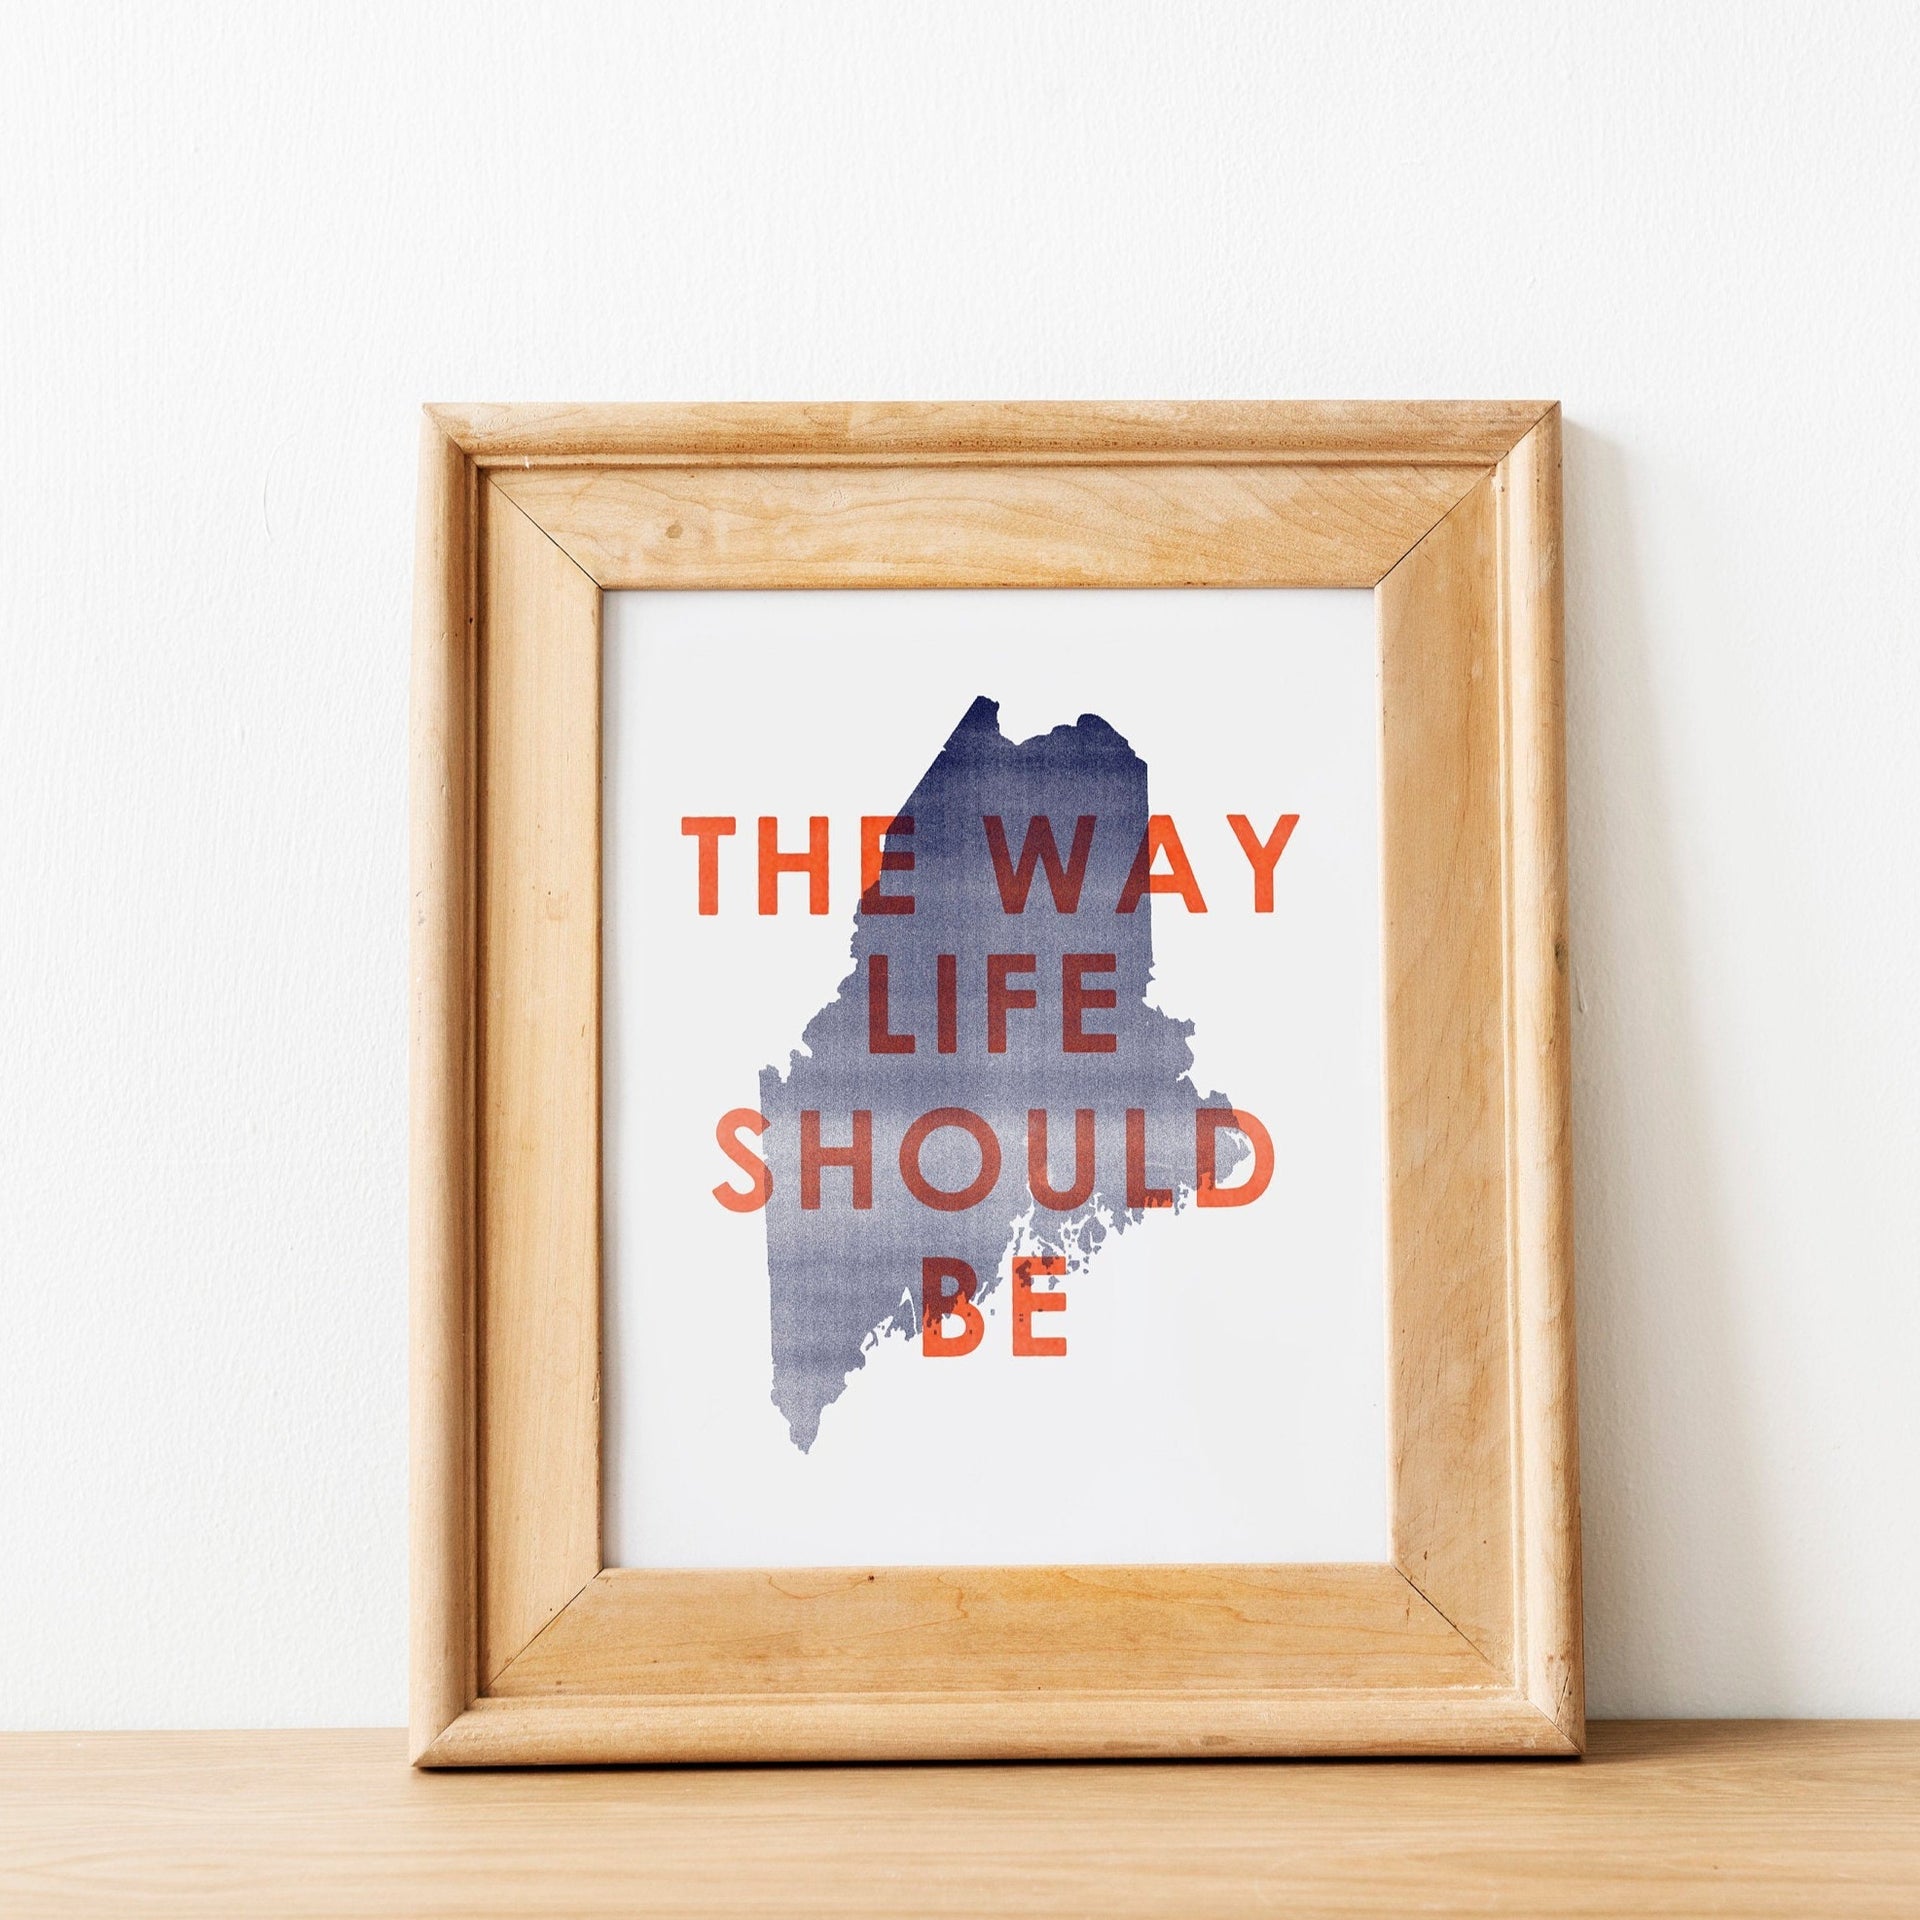 The Way Life Should Be Maine Print in Wood Frame by Gert & Co